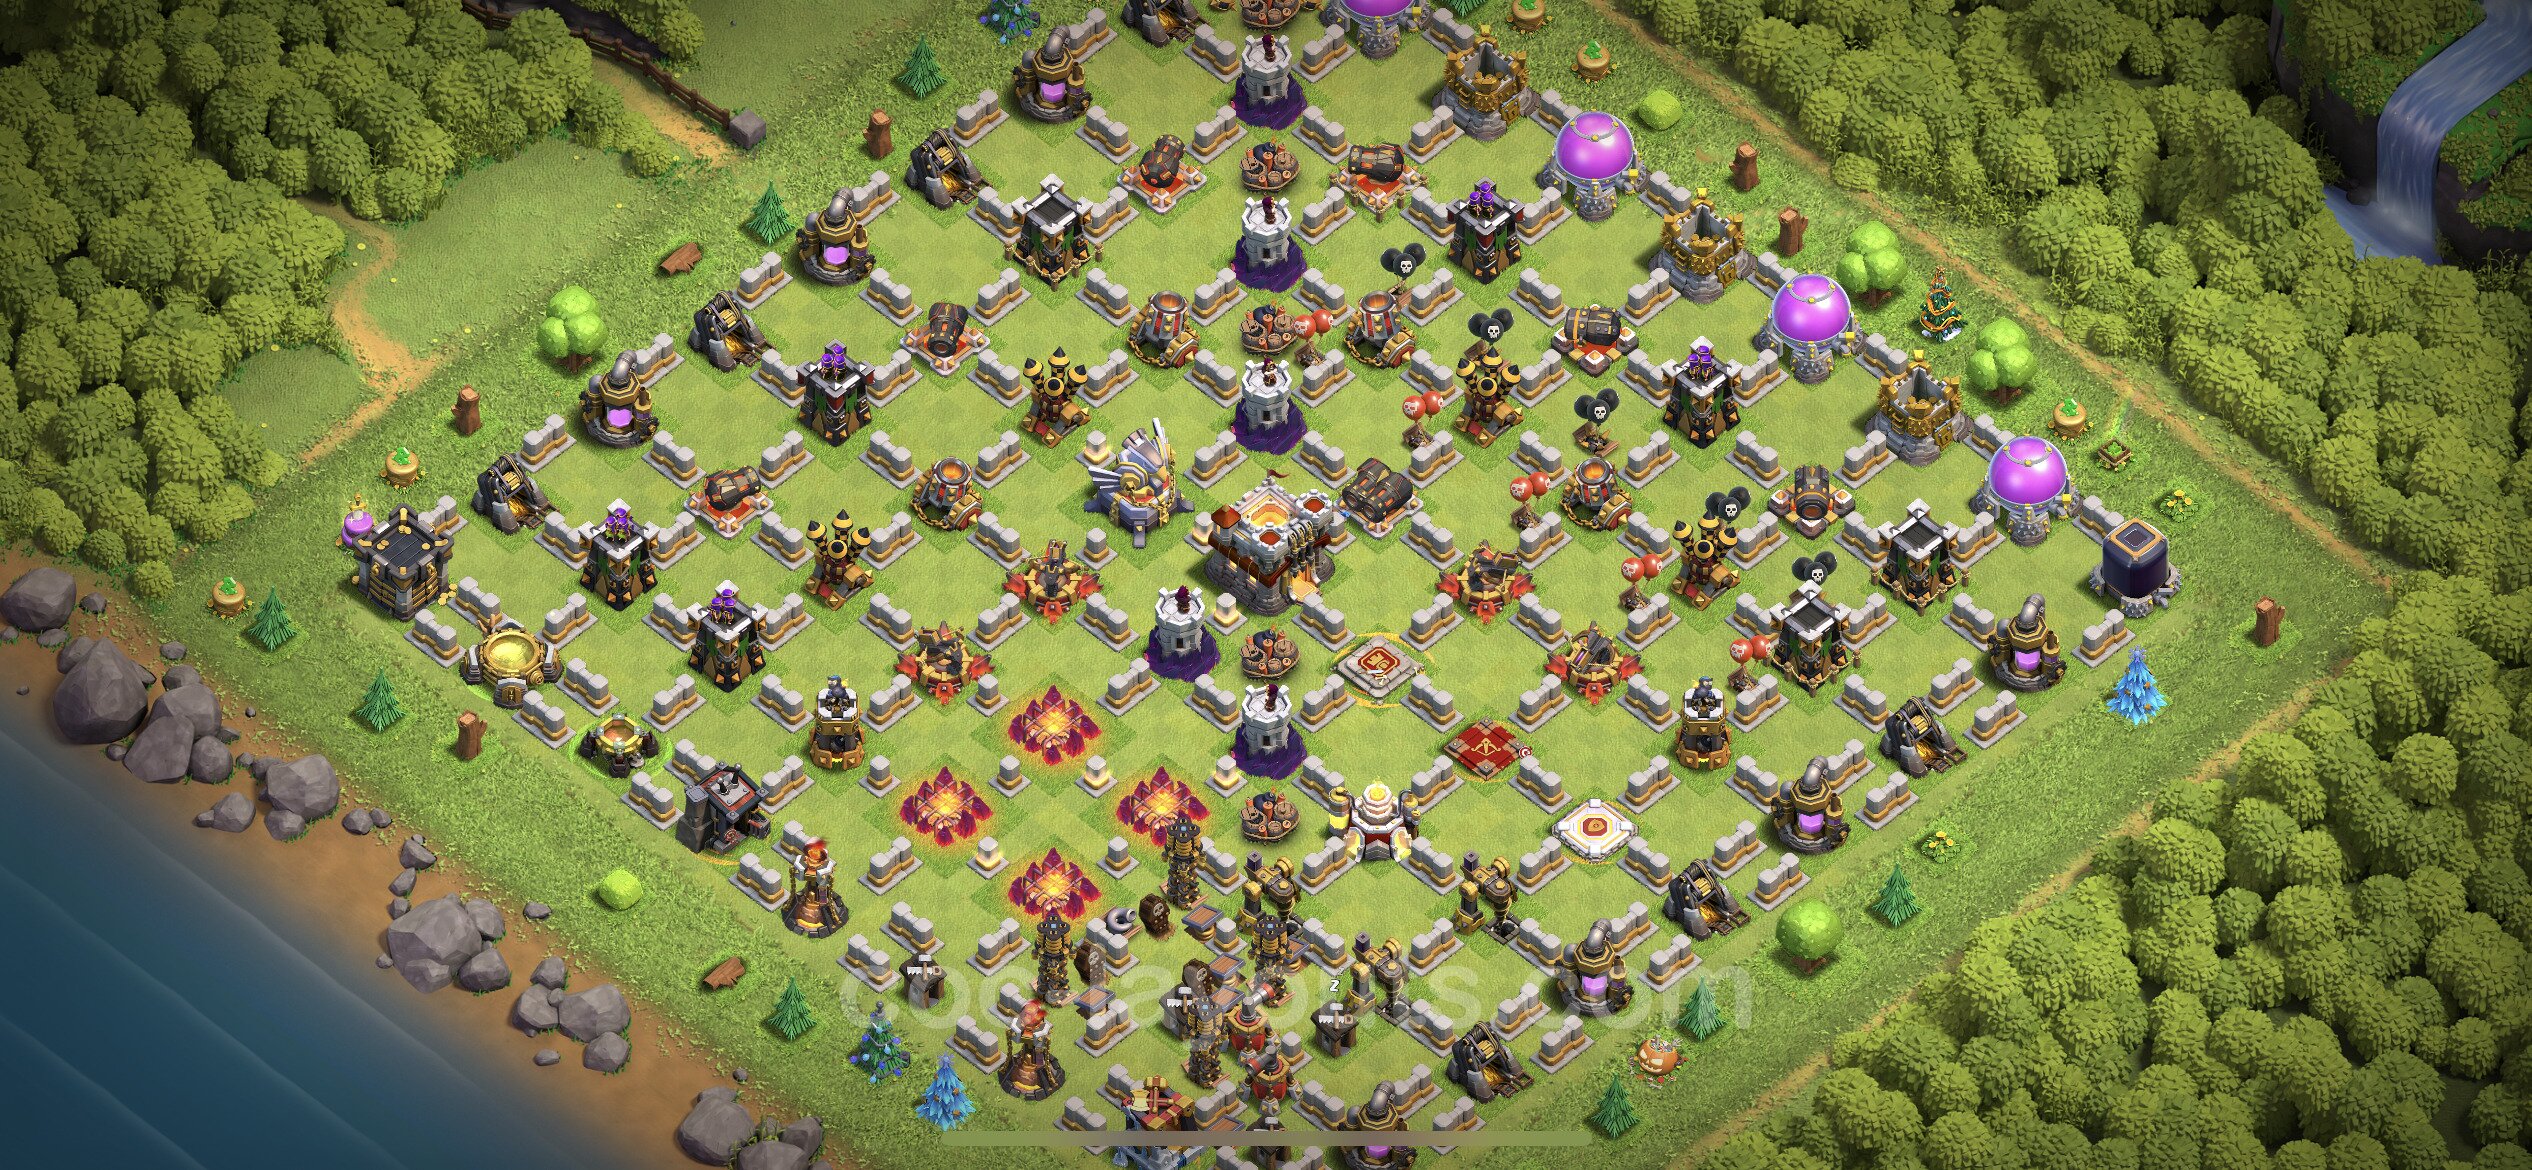 Best Funny Troll Base TH11 with Link 2022 - Town Hall Level 11 Art Base  Copy - (#17)